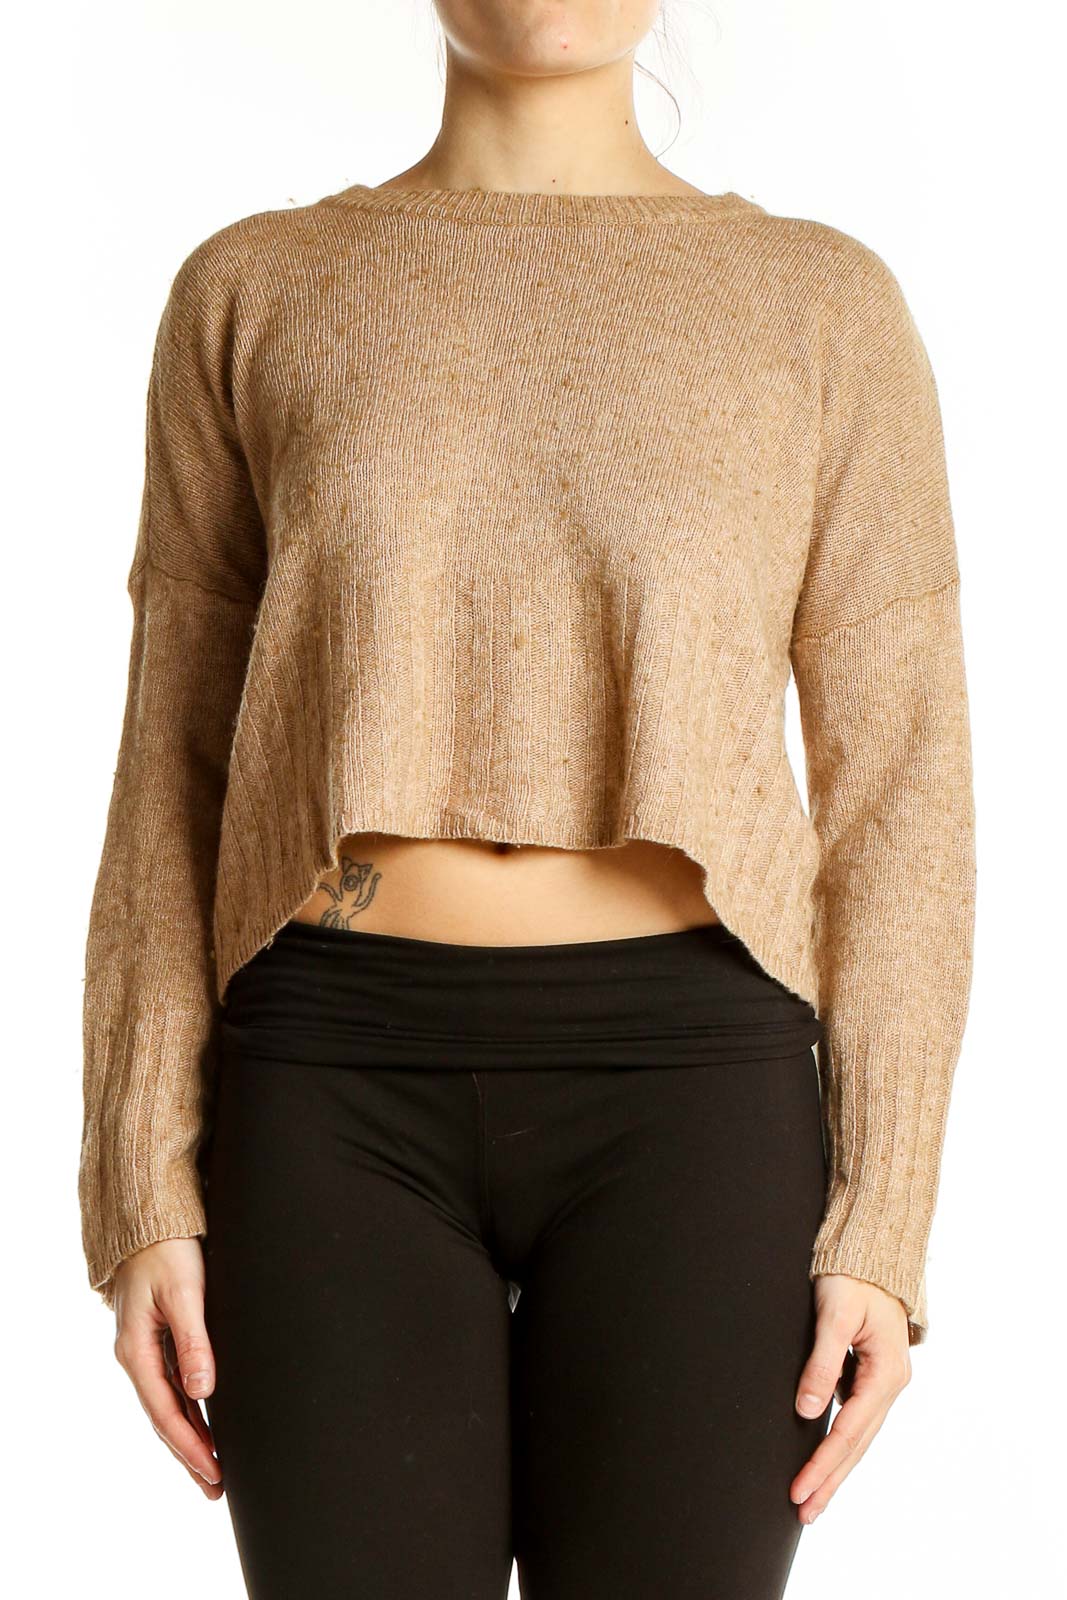 Brown Texture Sweater Front